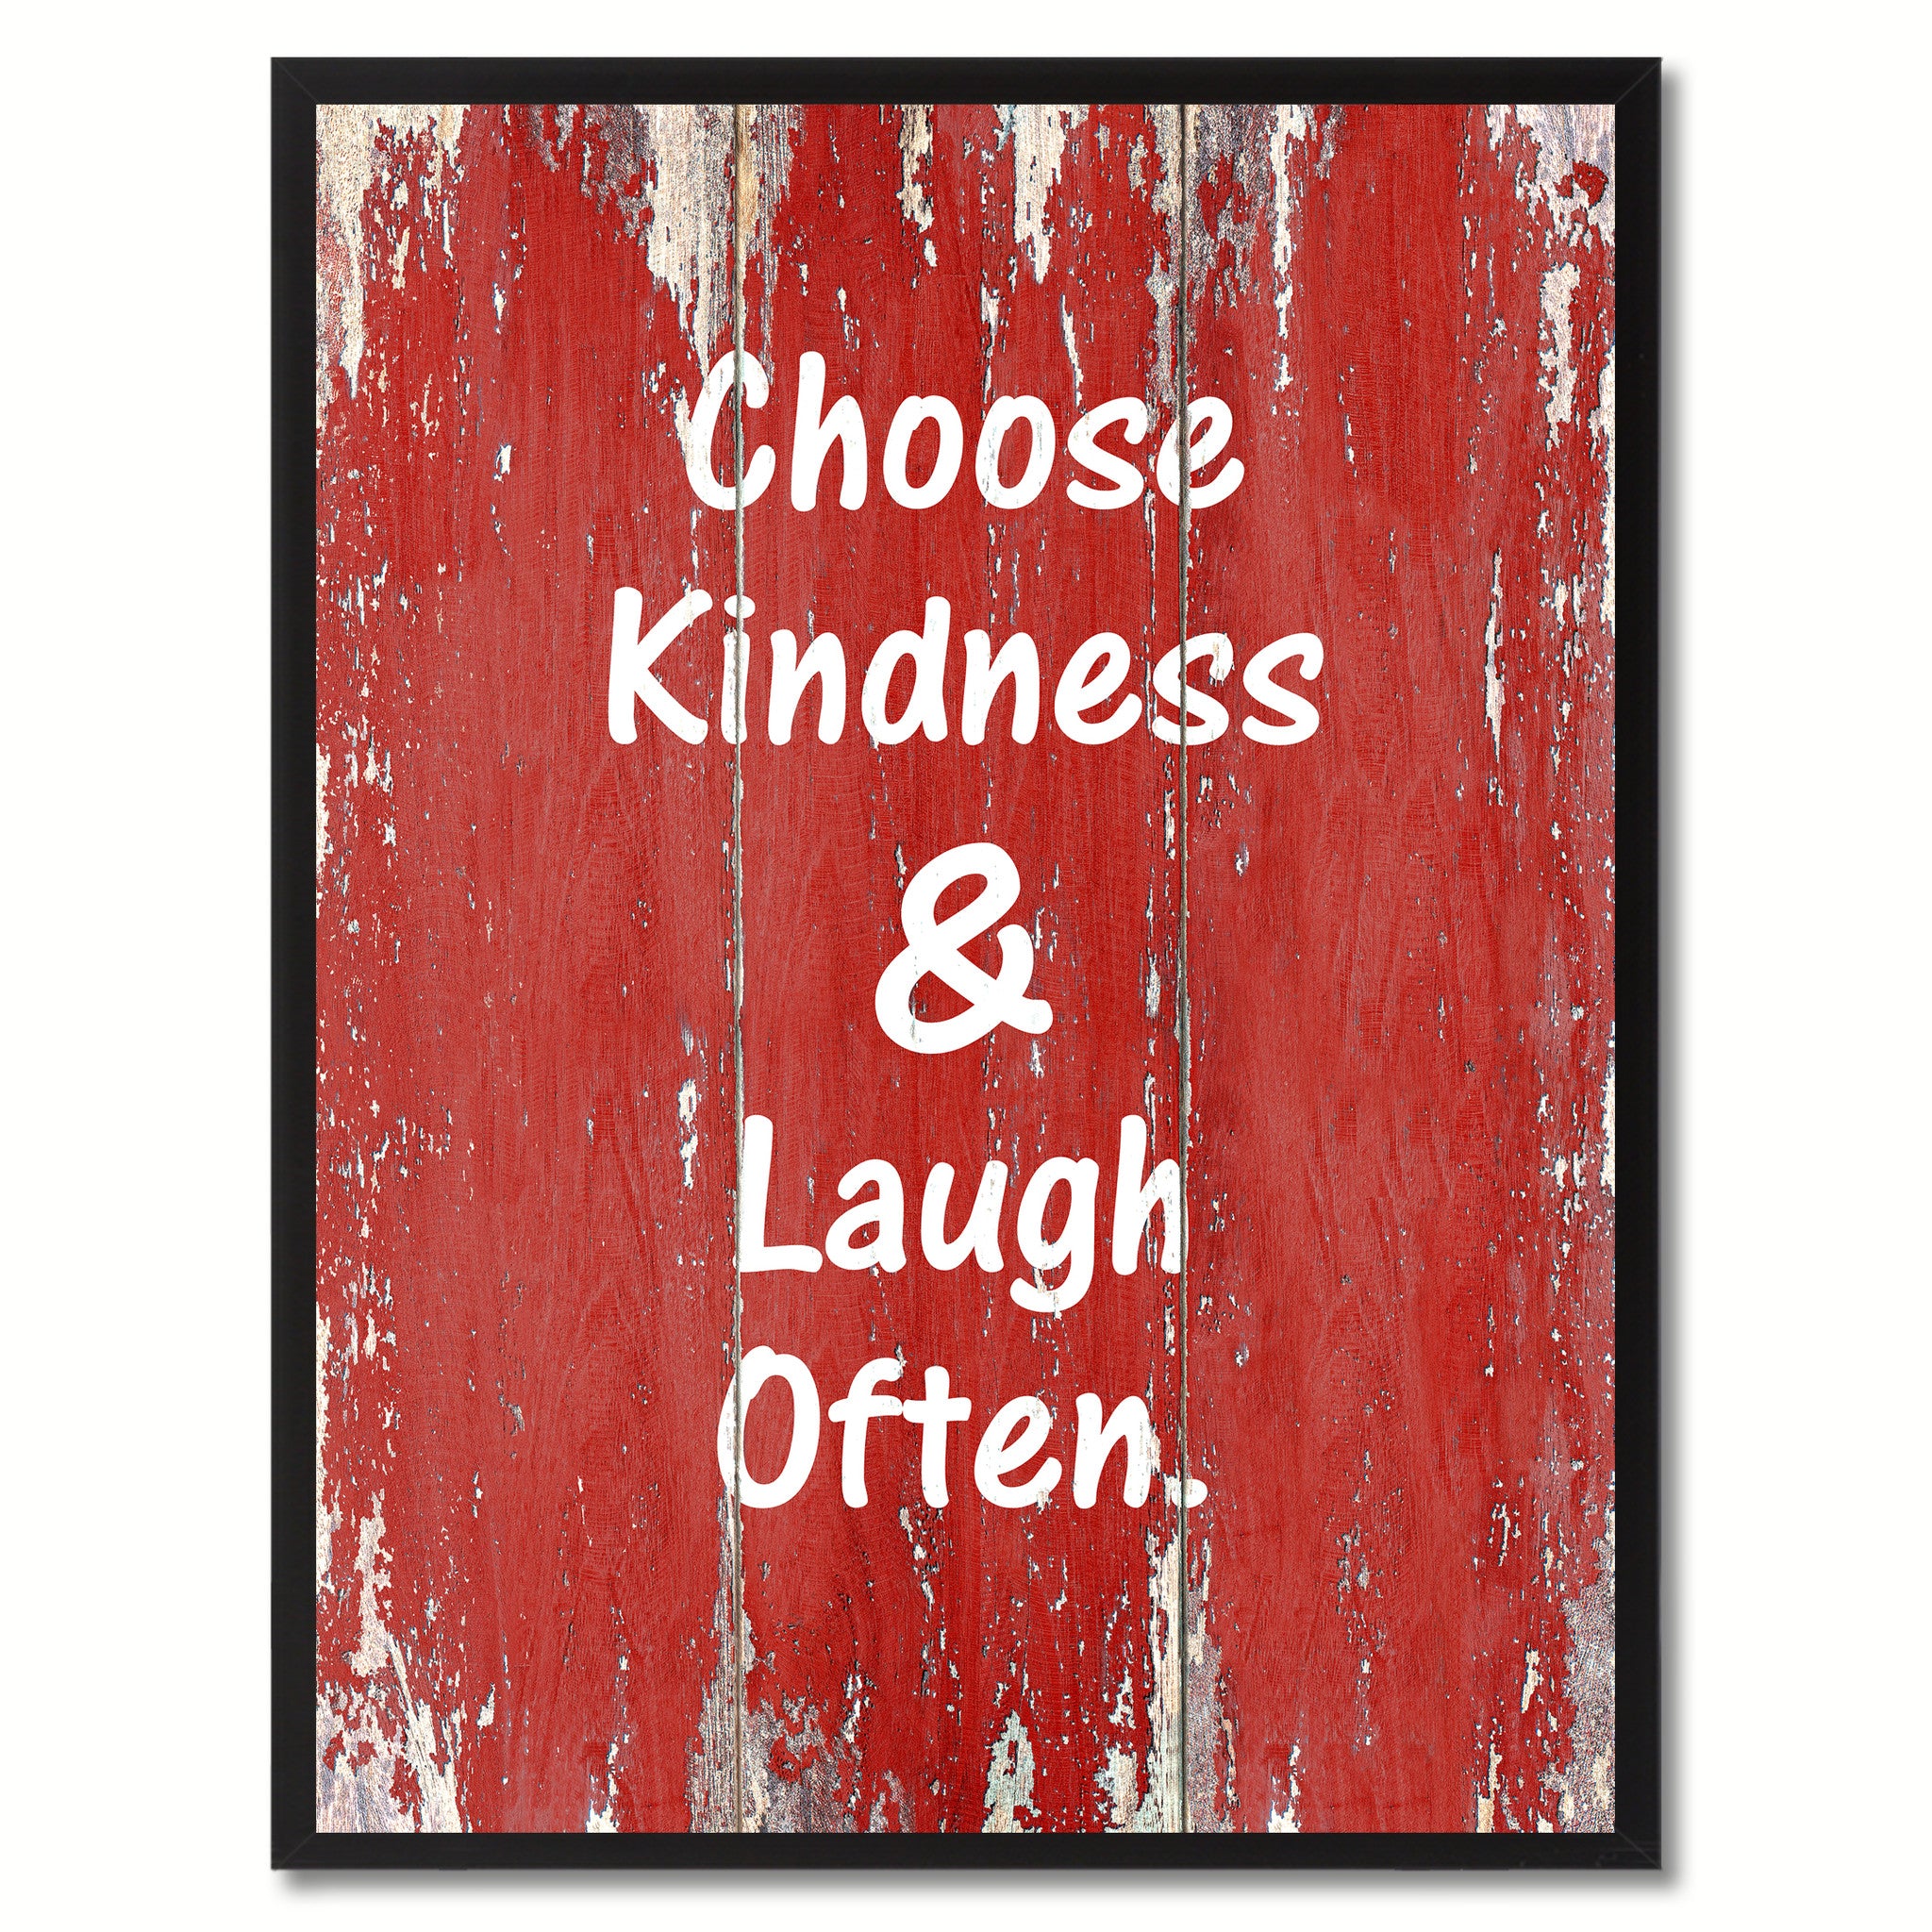 Choose Kindness & Laugh Often Saying Canvas Print, Black Picture Frame Home Decor Wall Art Gifts